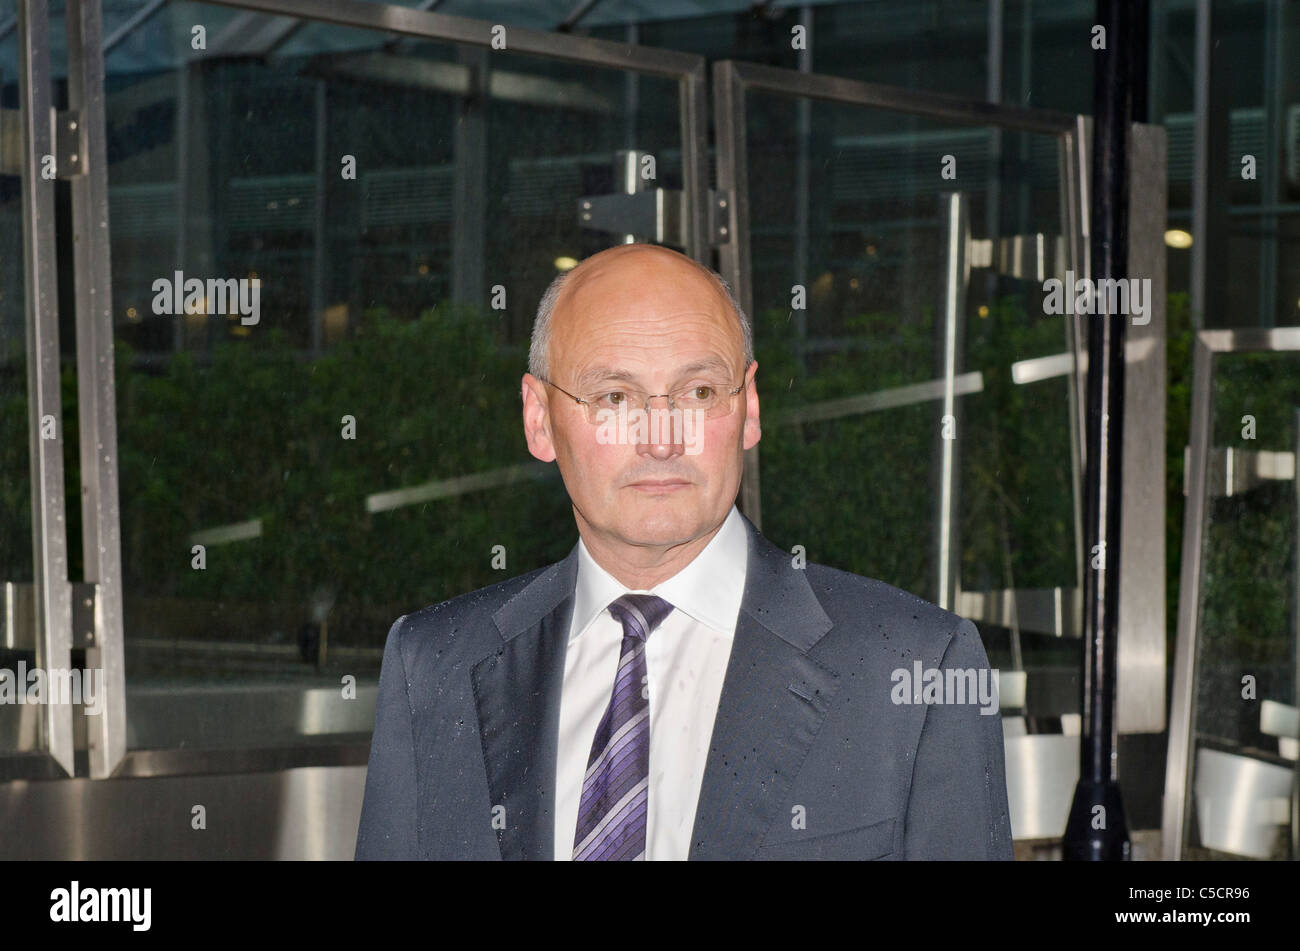 Sir Paul Stephenson Commissioner of the Metropolitan Police outside New Scotland Yard resigning Stock Photo